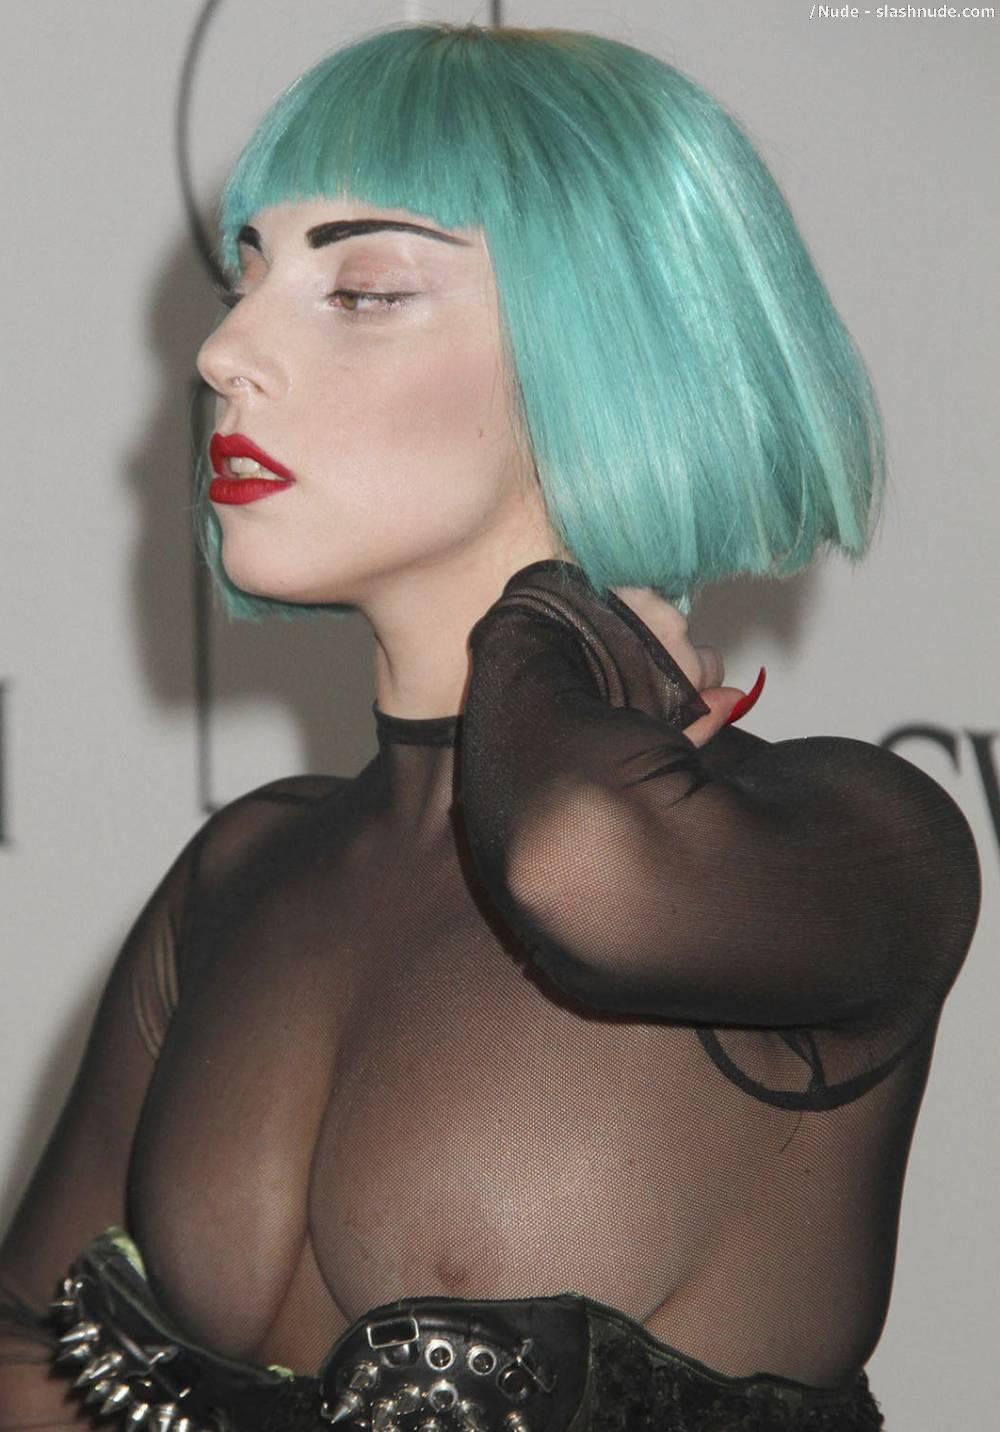 Lady Gaga Nipples Make Special Appearance At Fashion Event 9